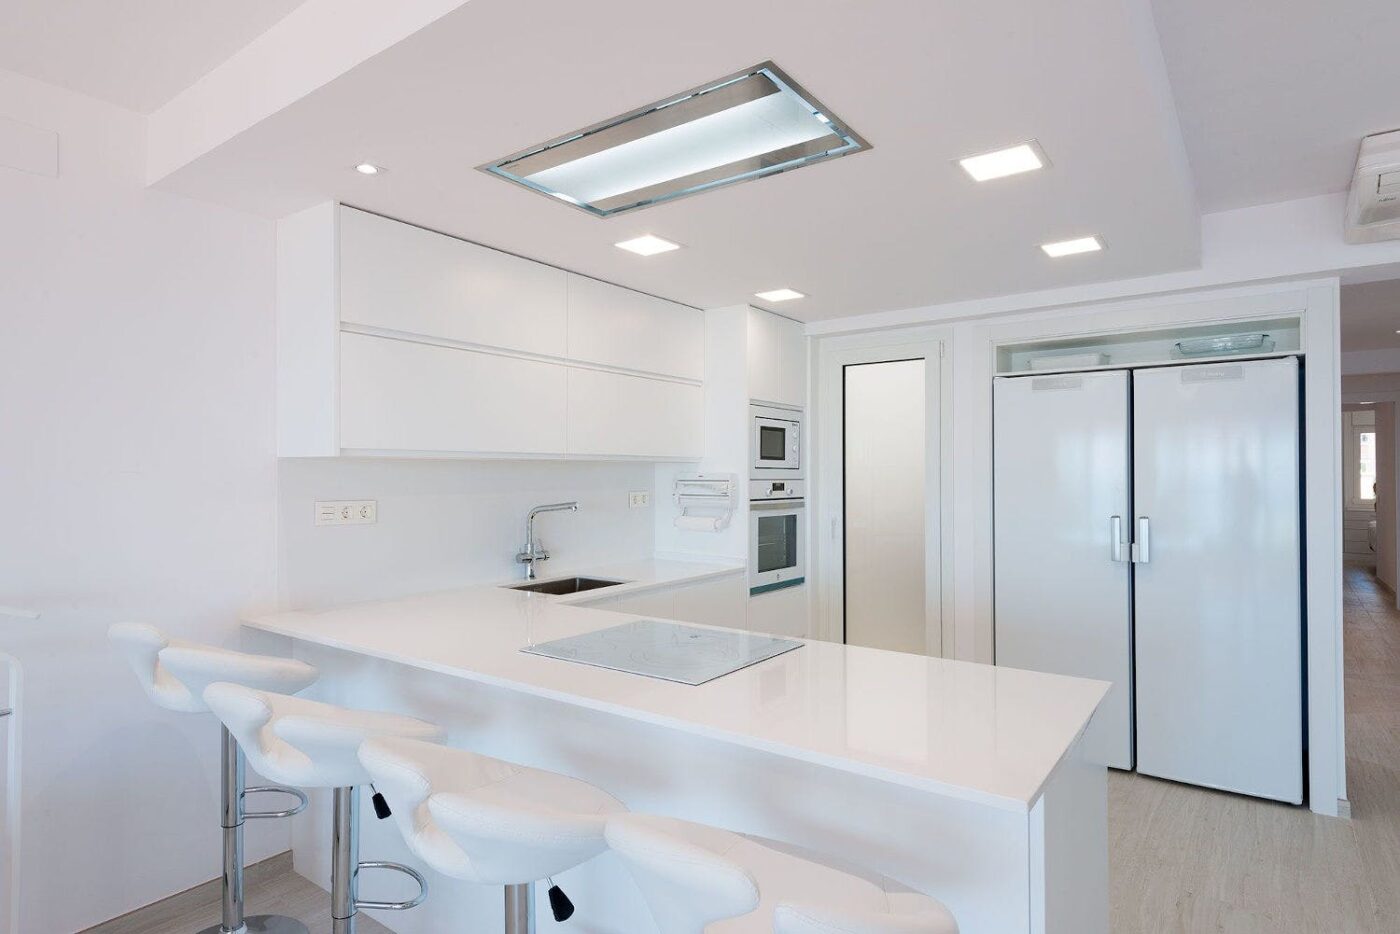 Image of Instalaciones Ricard Zenith in L-shaped kitchens, functionality and design in any space - Cosentino